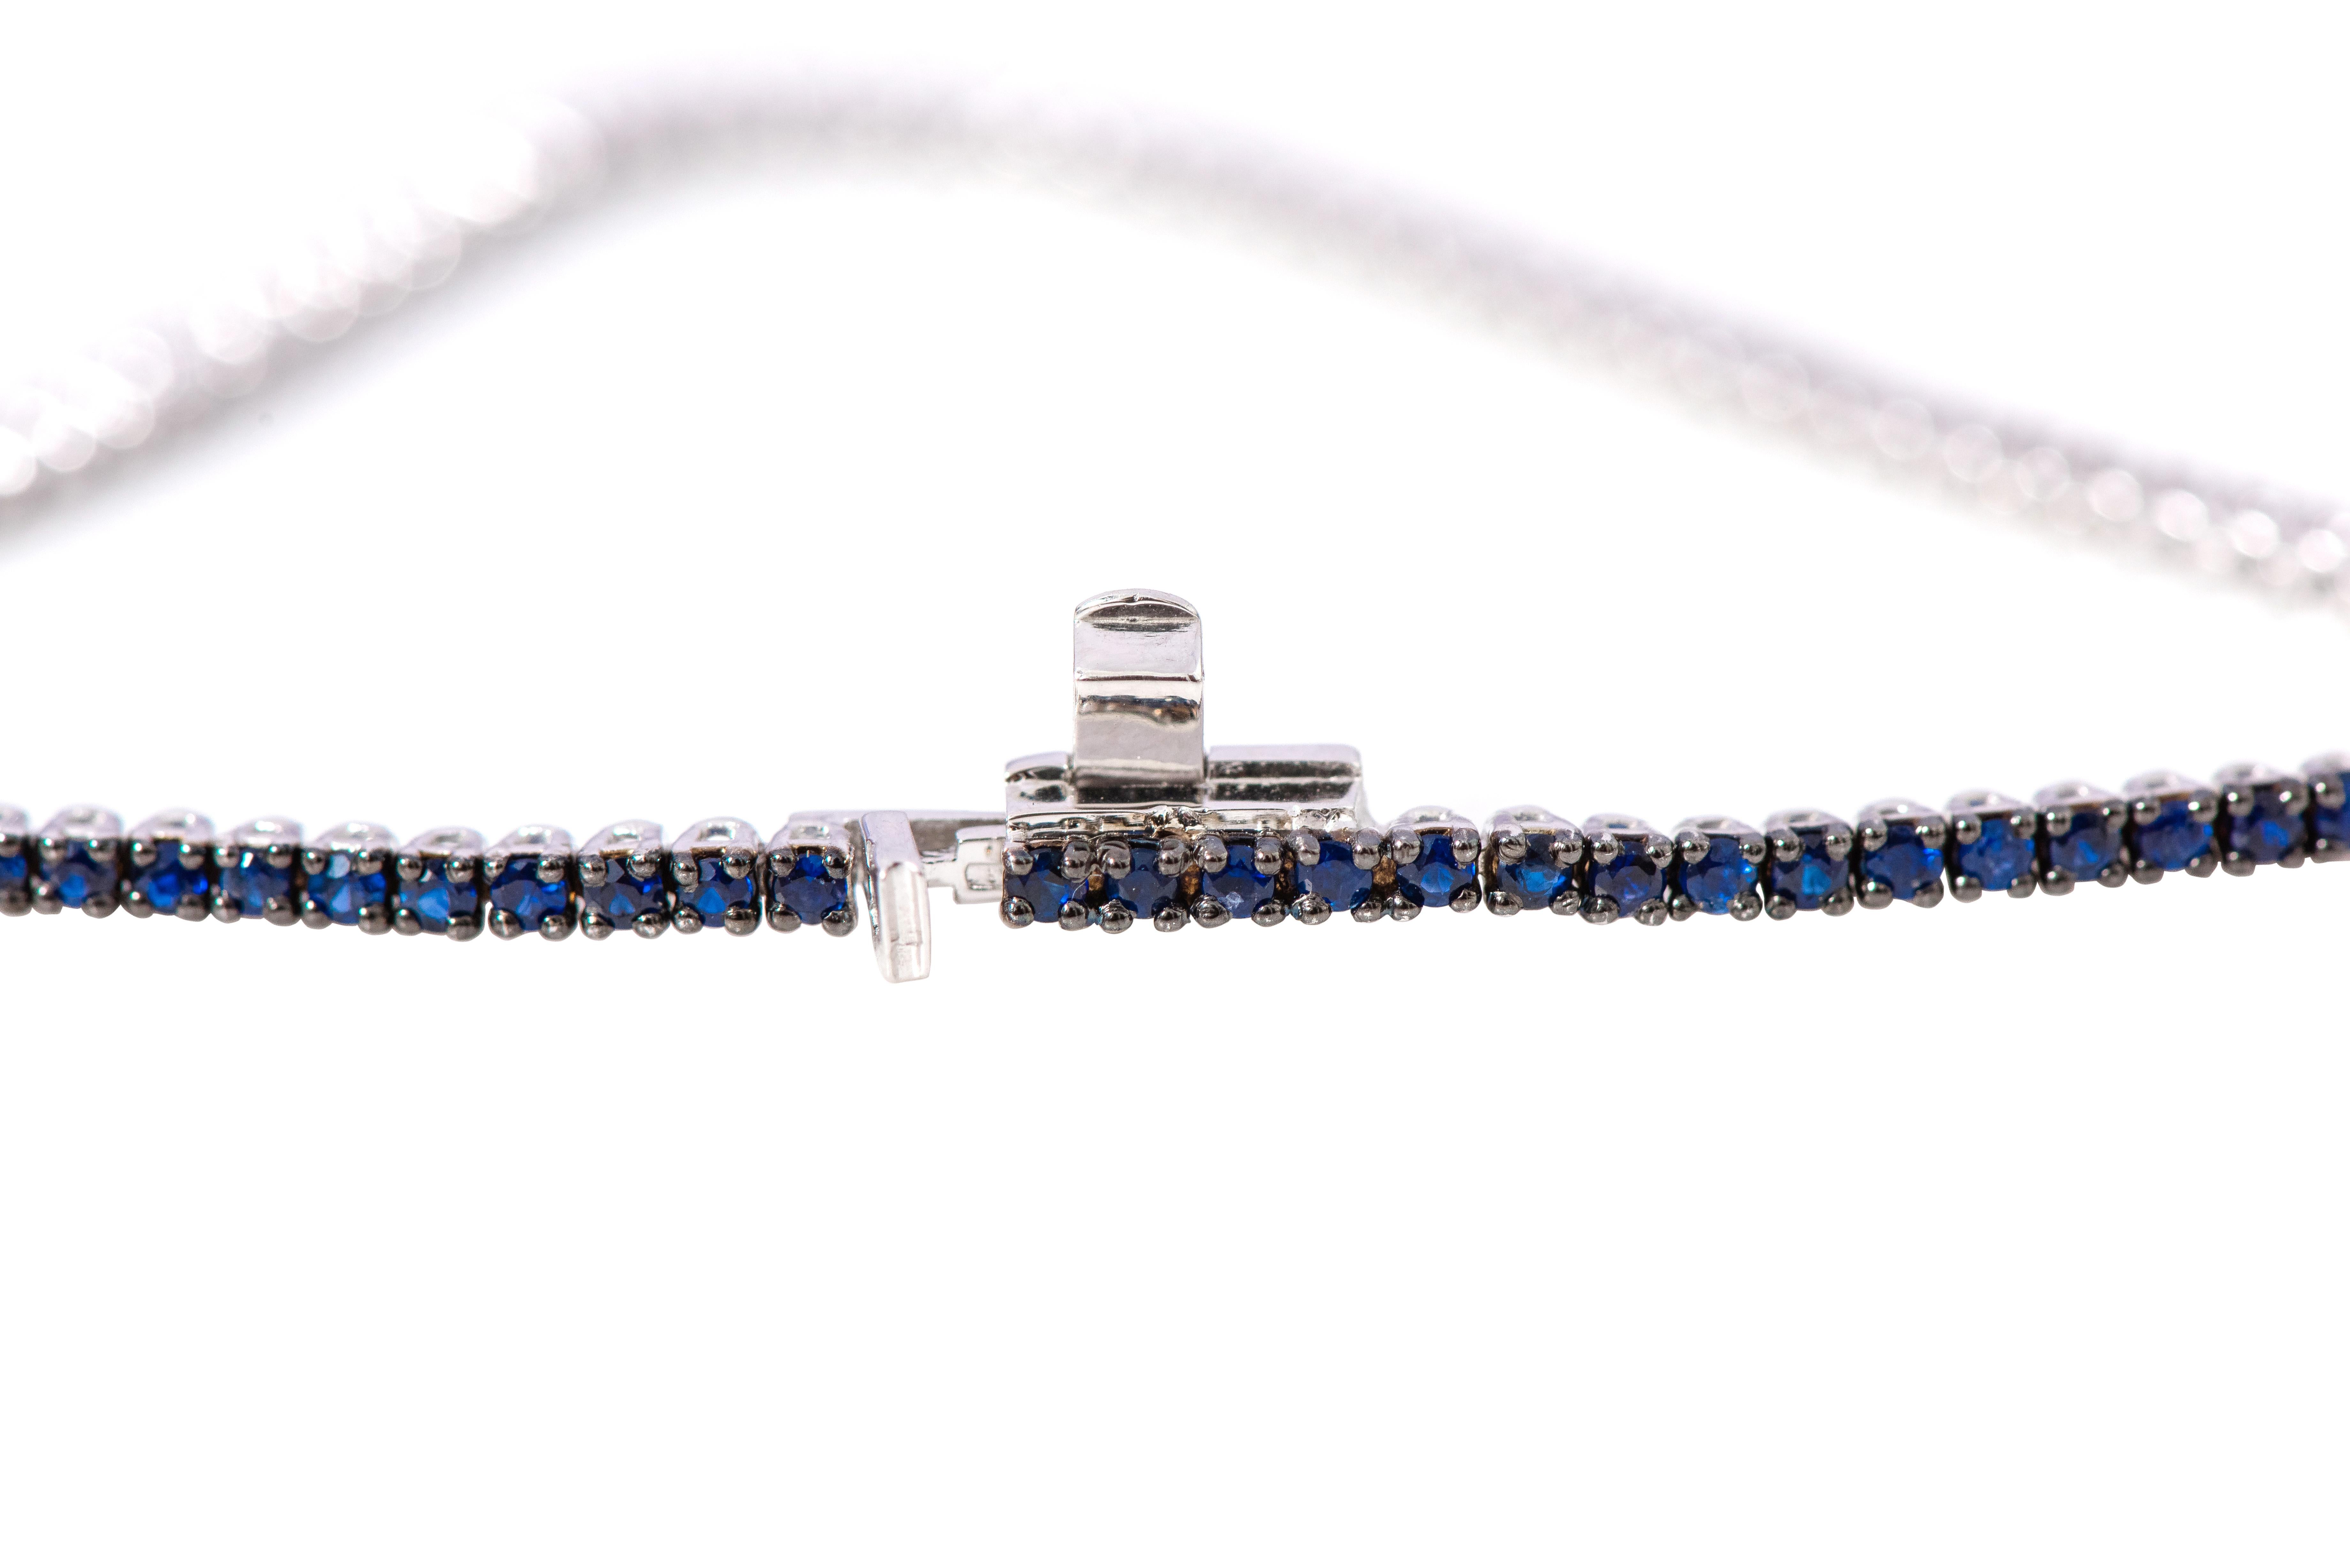 18 Karat White Gold 2.10 Carat Round-Cut Sapphire Tennis Bracelet

This classy and elegant indigo blue sapphire thin tennis bracelet is eternal. The tennis bracelet with identical size round solitaire sapphires with the perfect cut and crown is